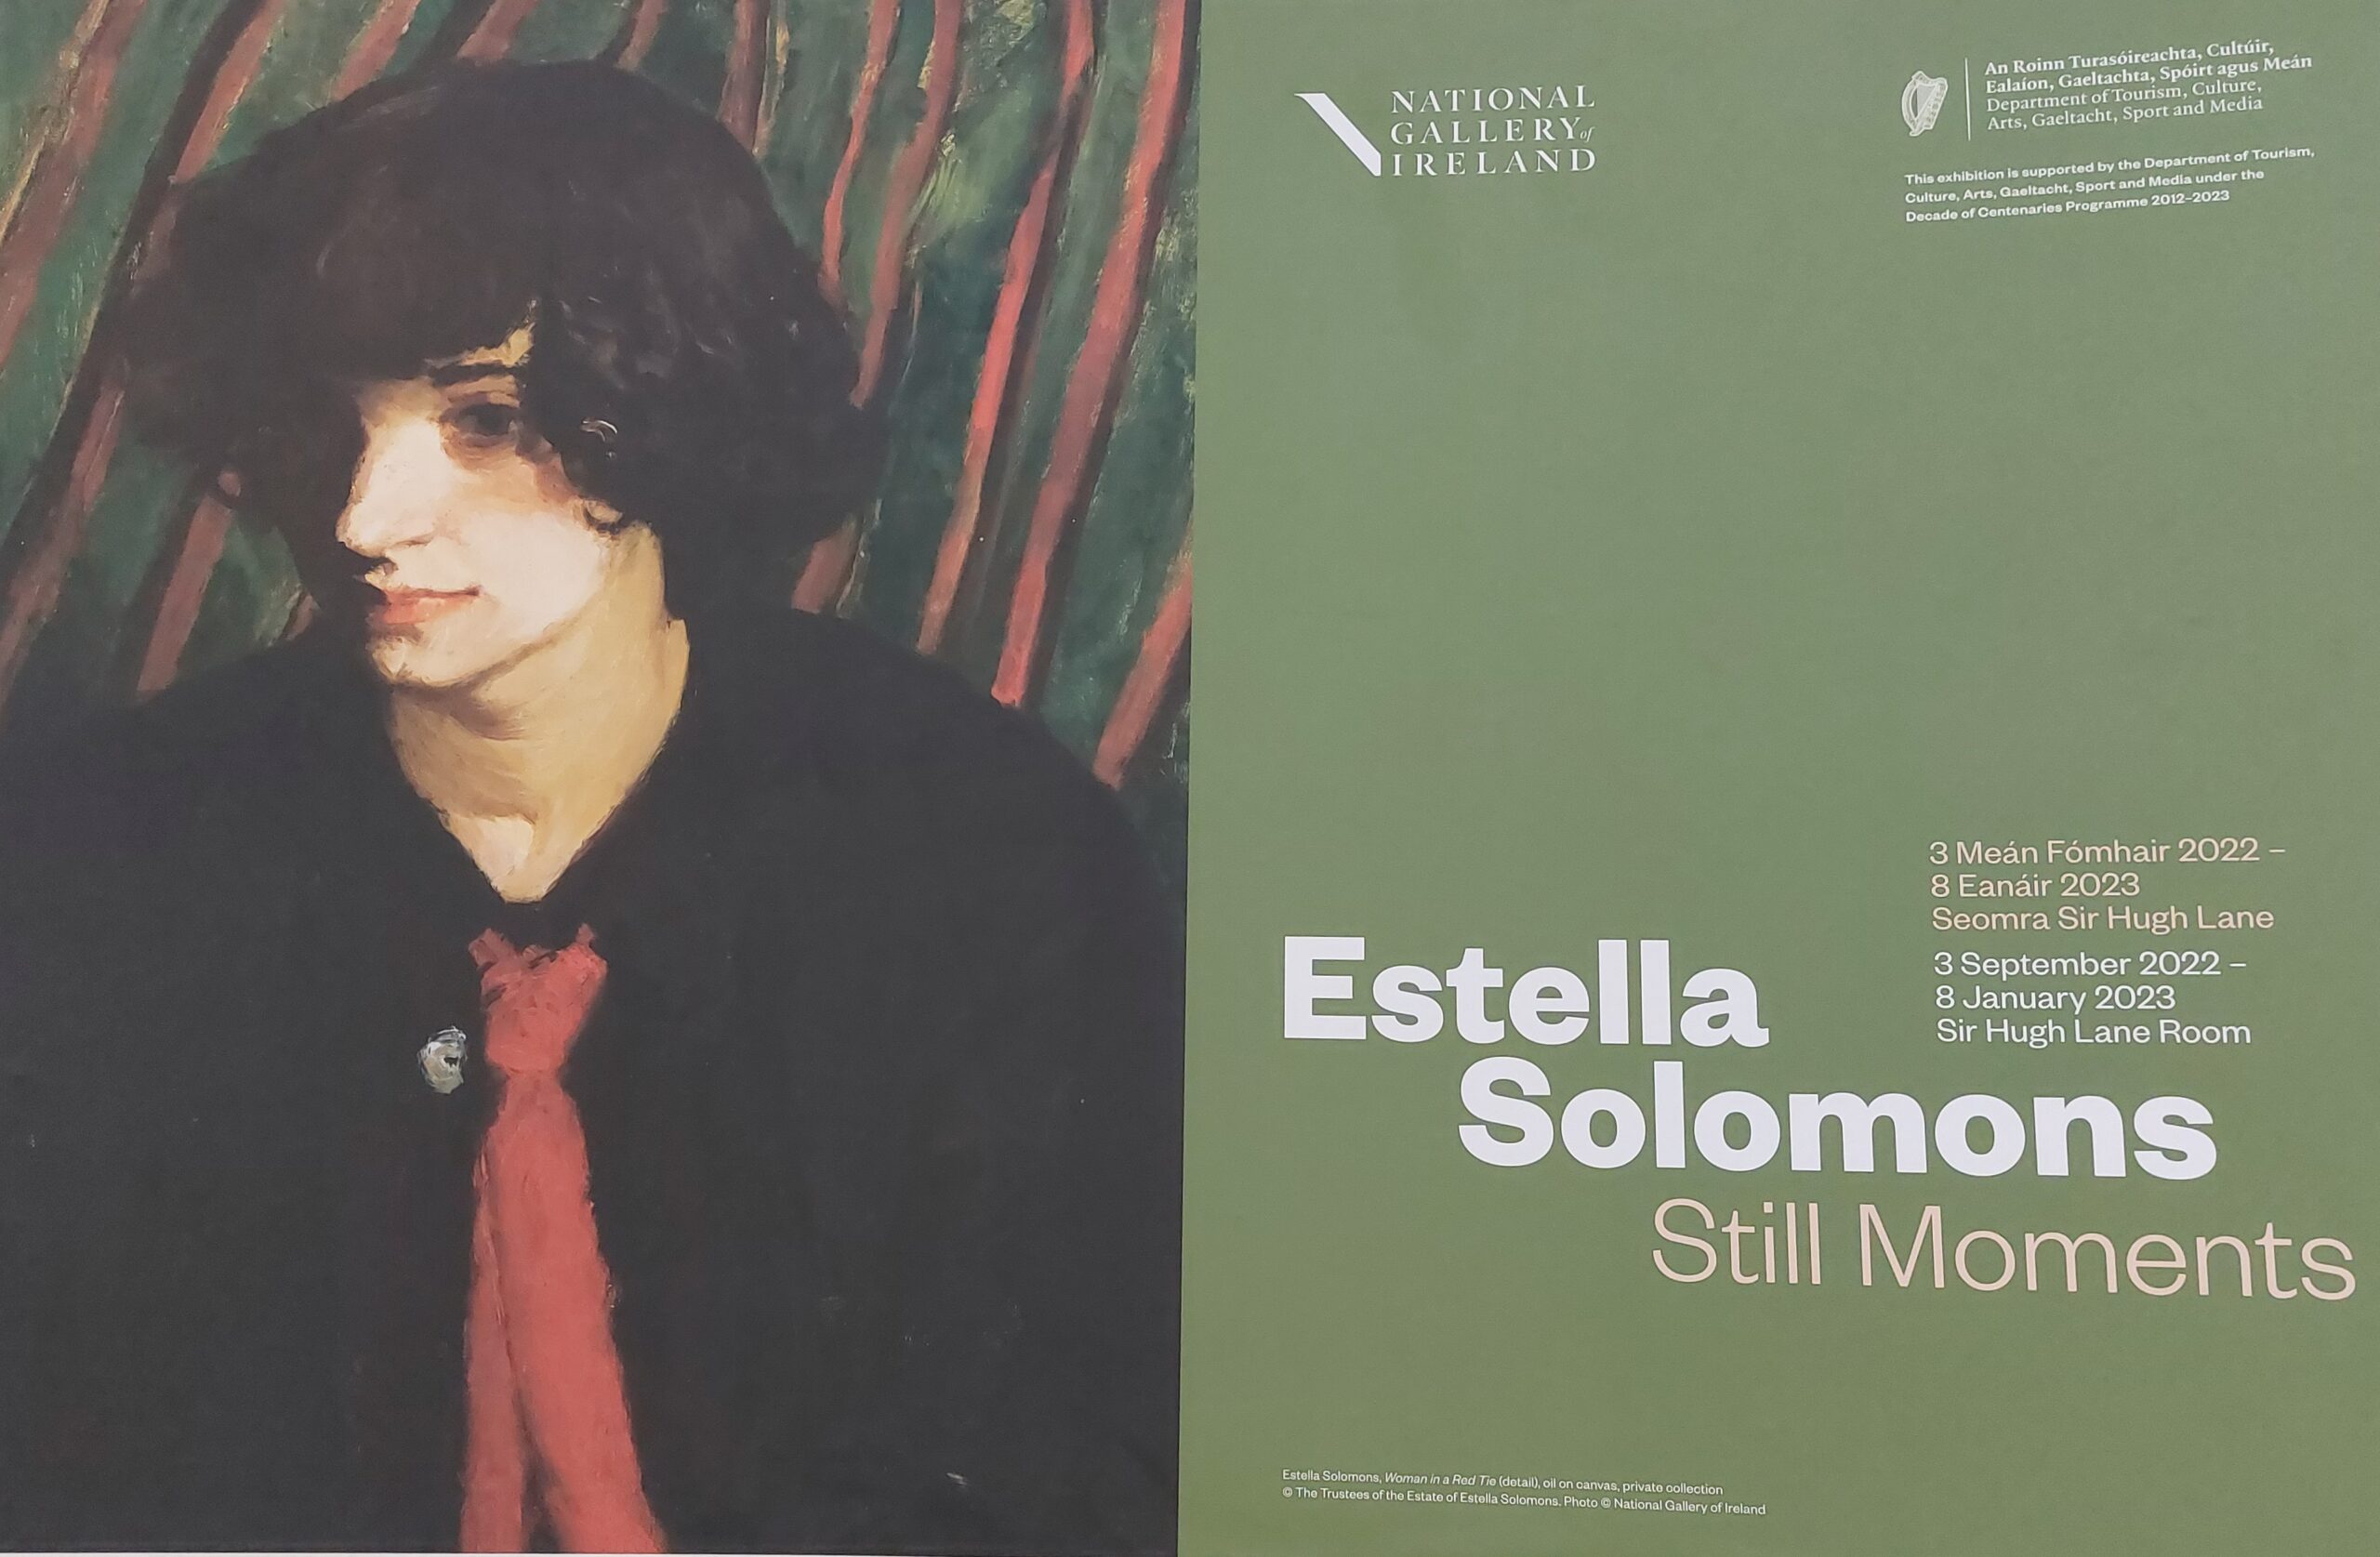 Poster for the Still Moments exhibition of Estella Solomons' work at the National Gallery Ireland 3 September 2022 - 8 January 2023